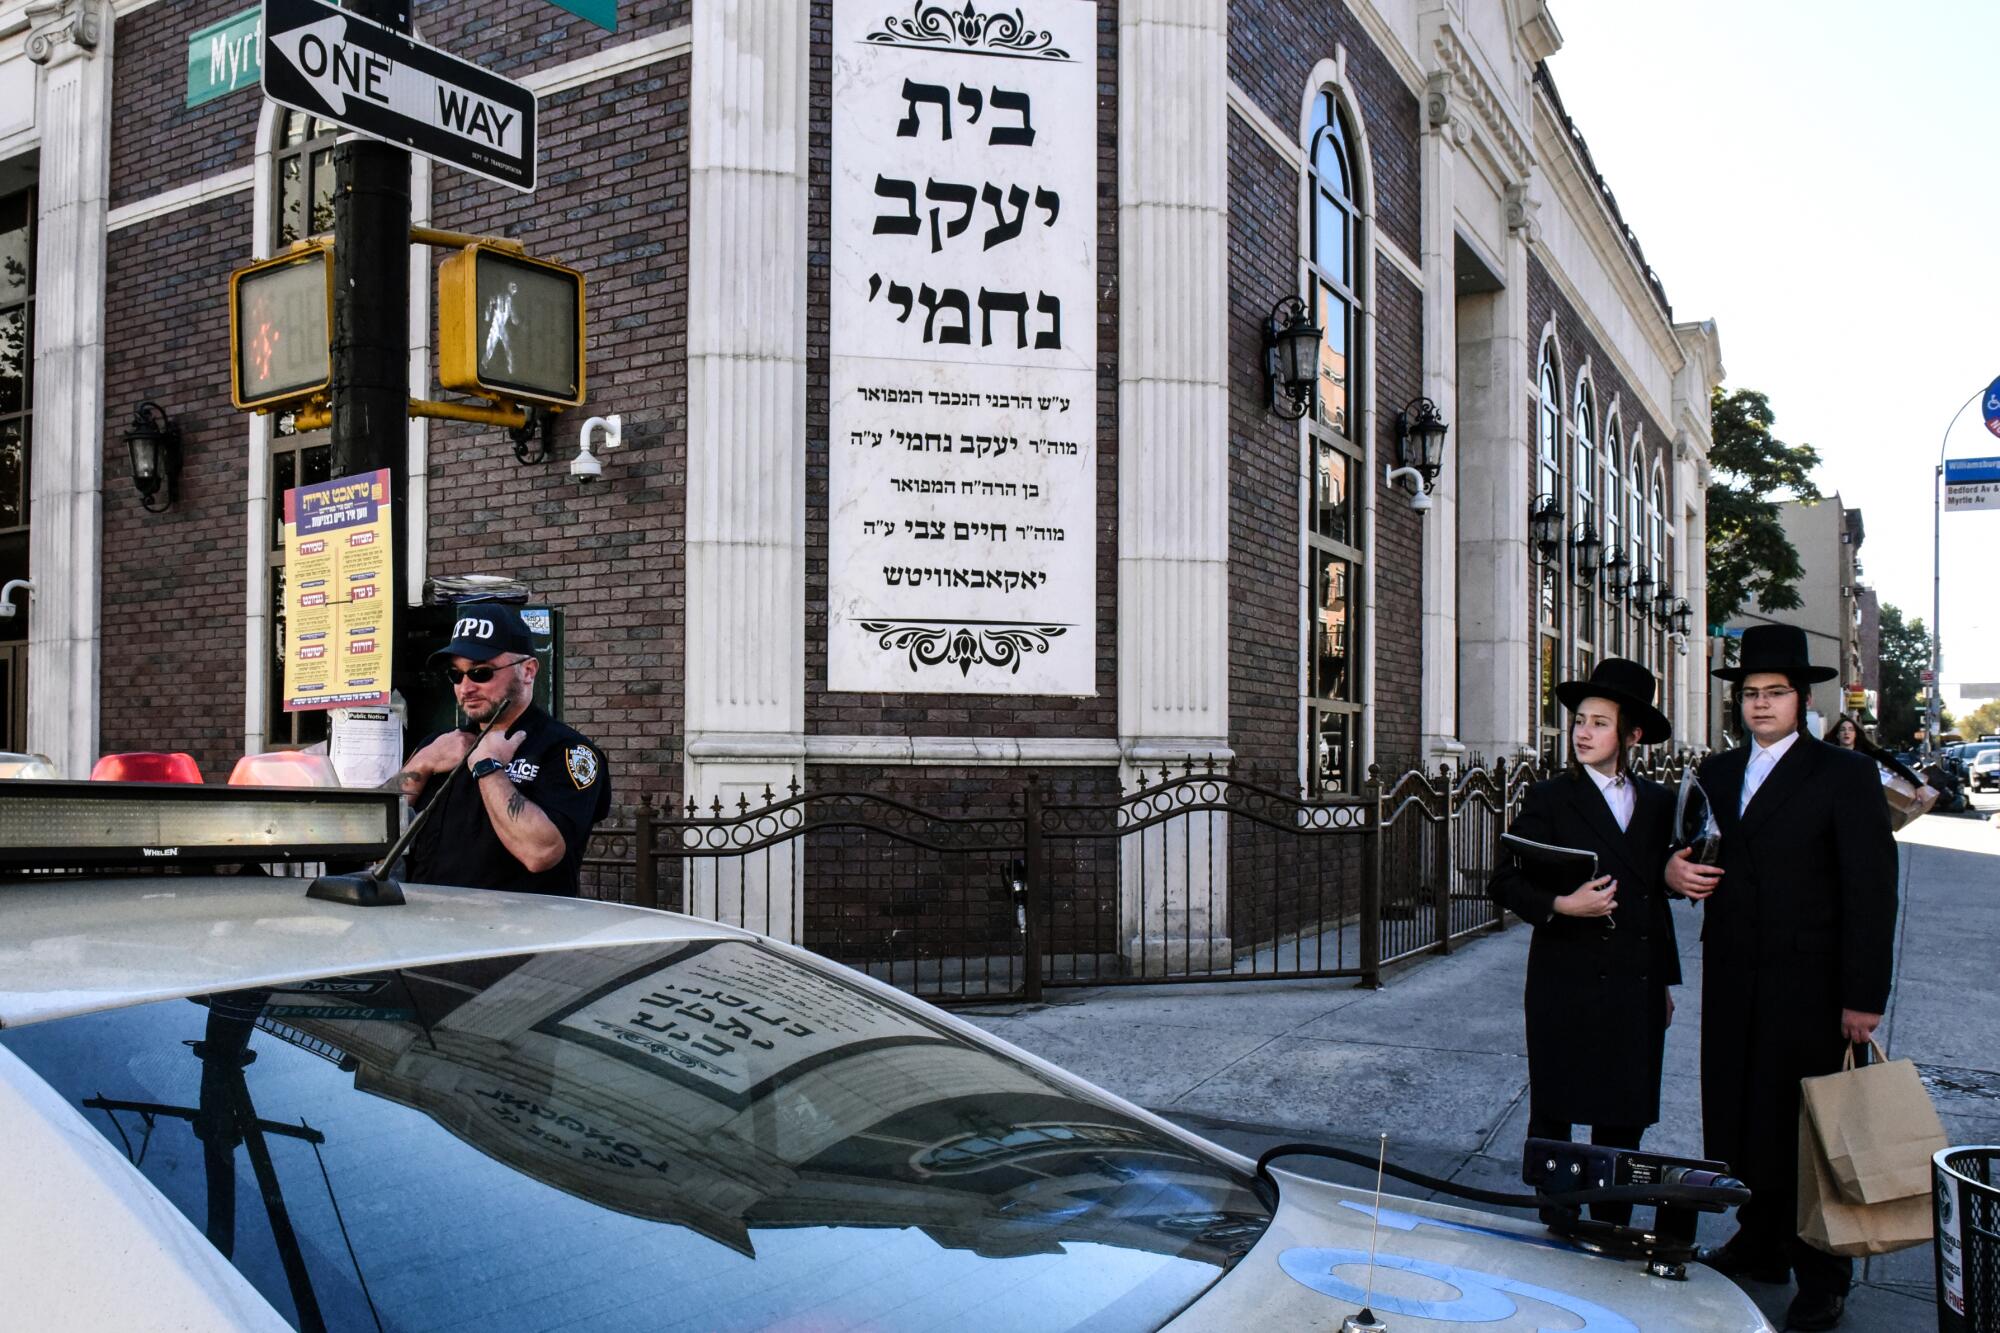 A police officer on a street corner near two men in ultra-Orthodox Jewish attire.